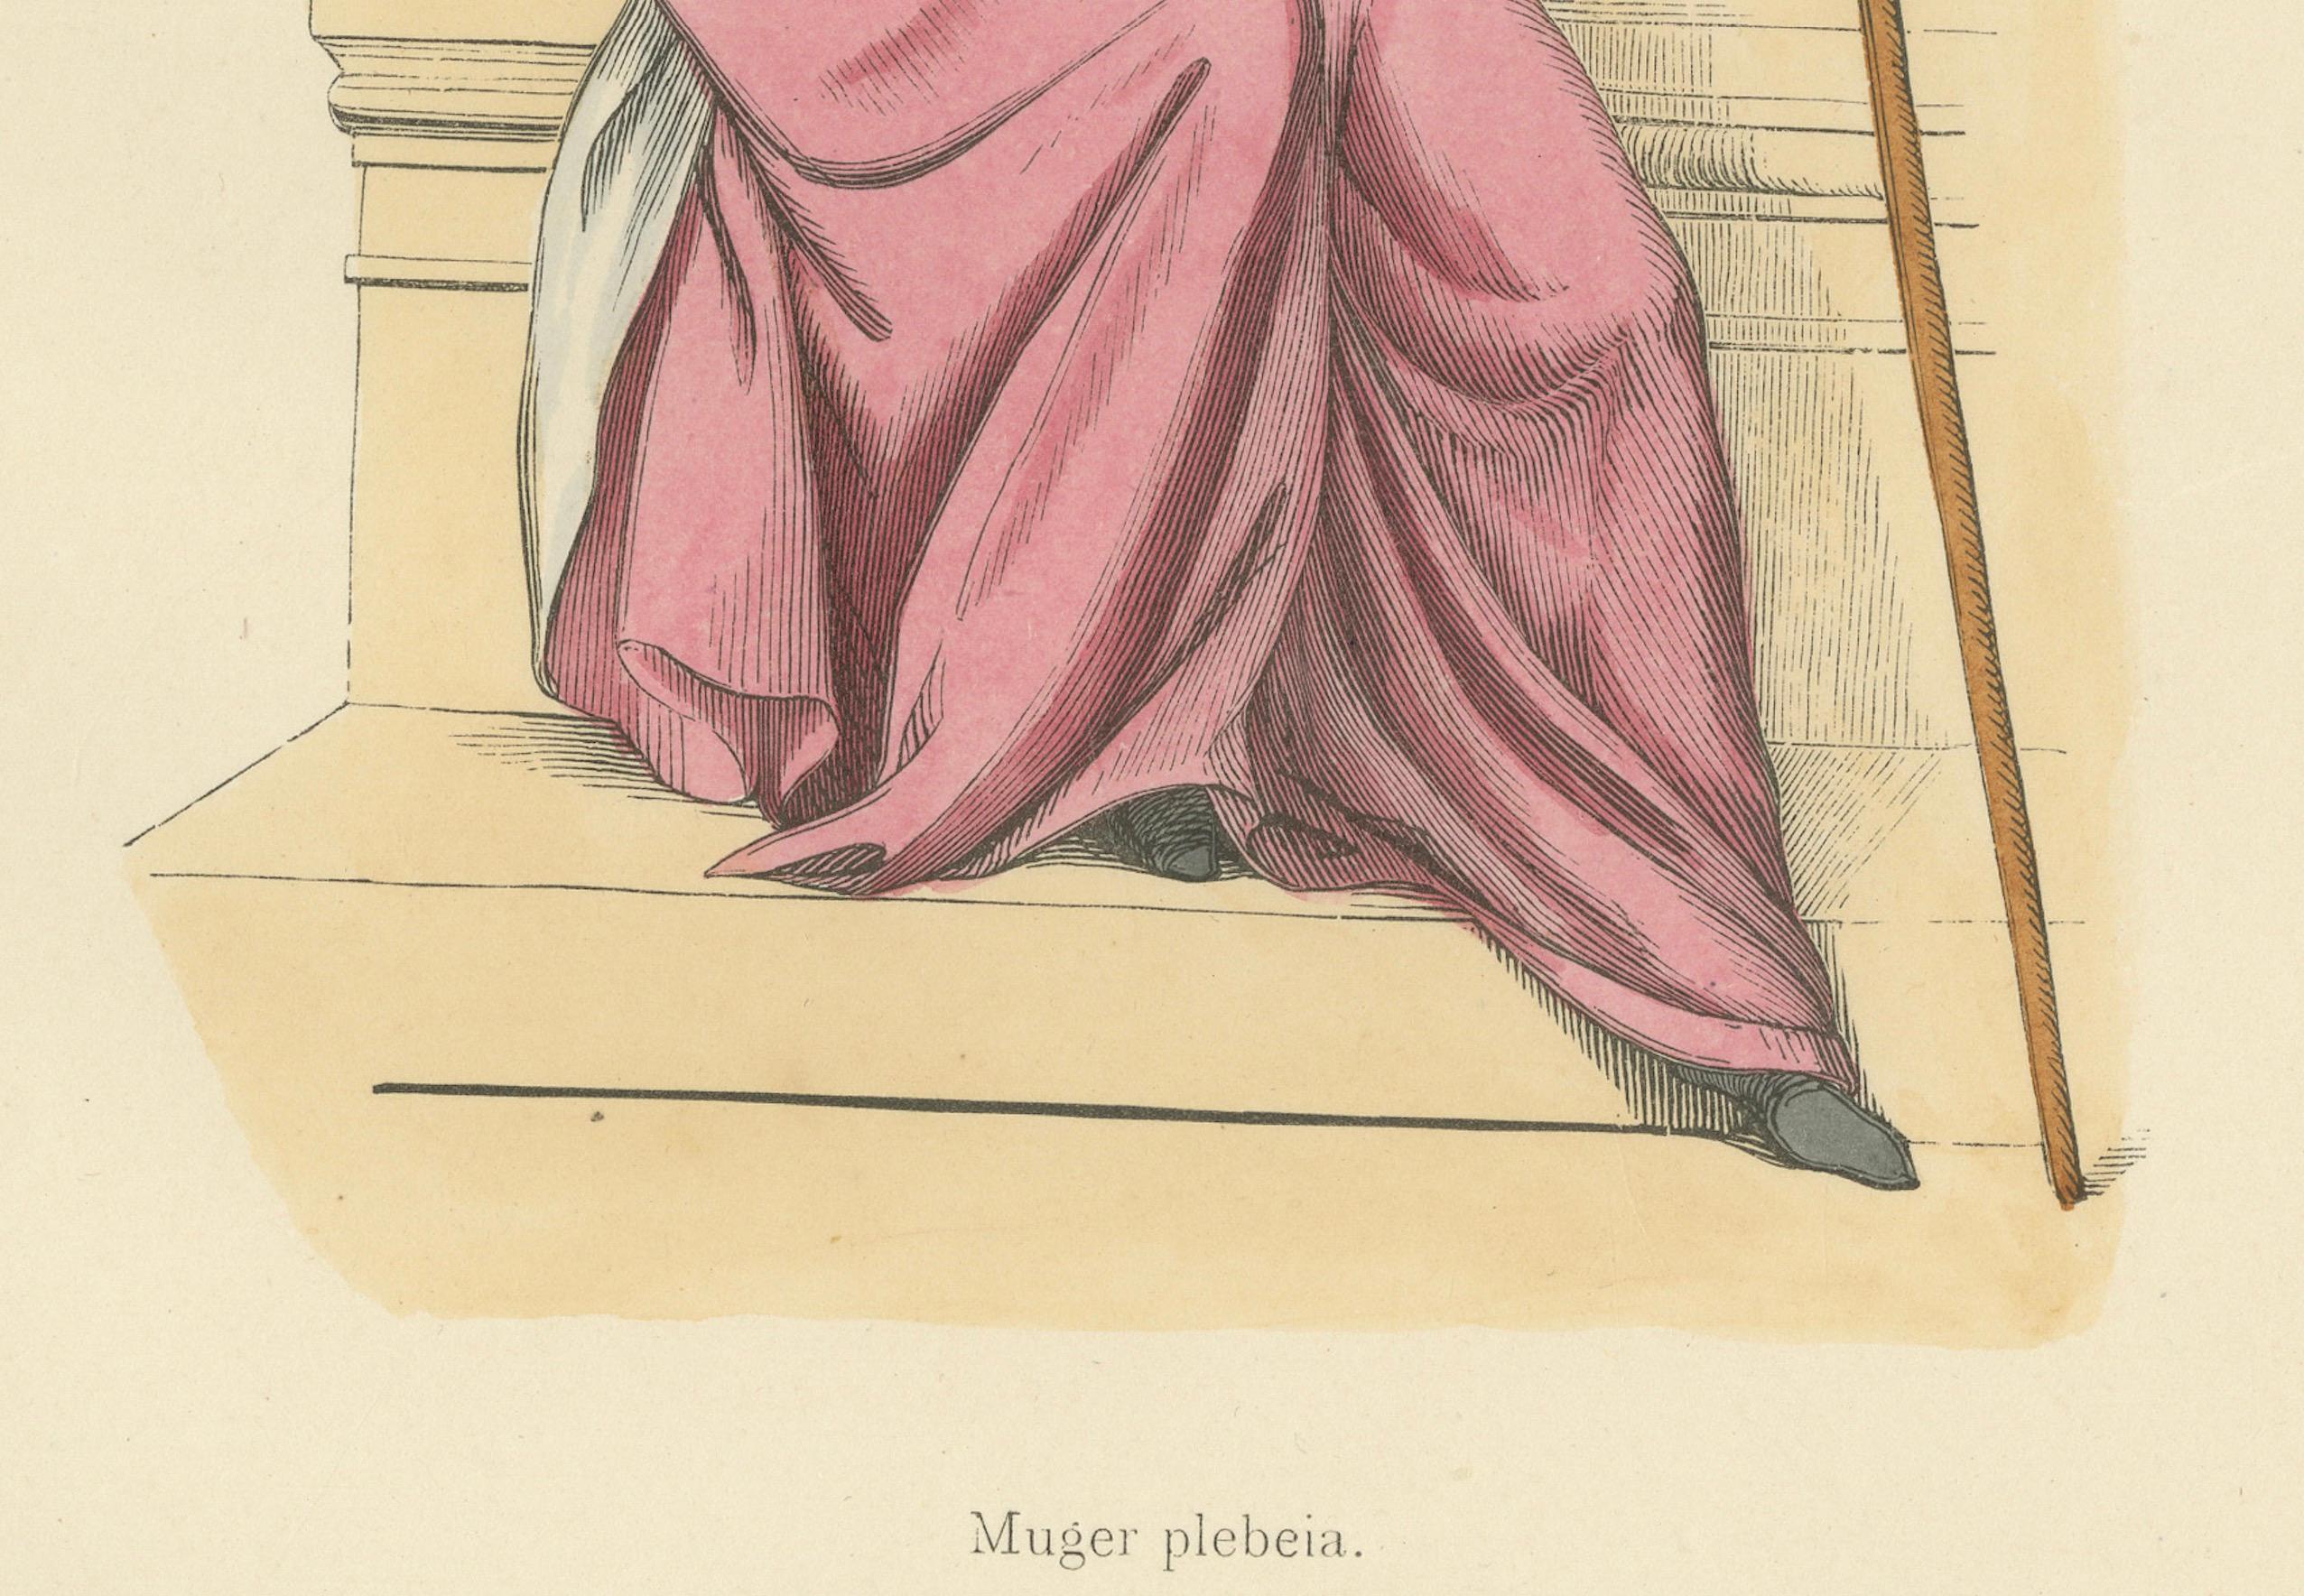 The original antique print shows a seated figure labeled 